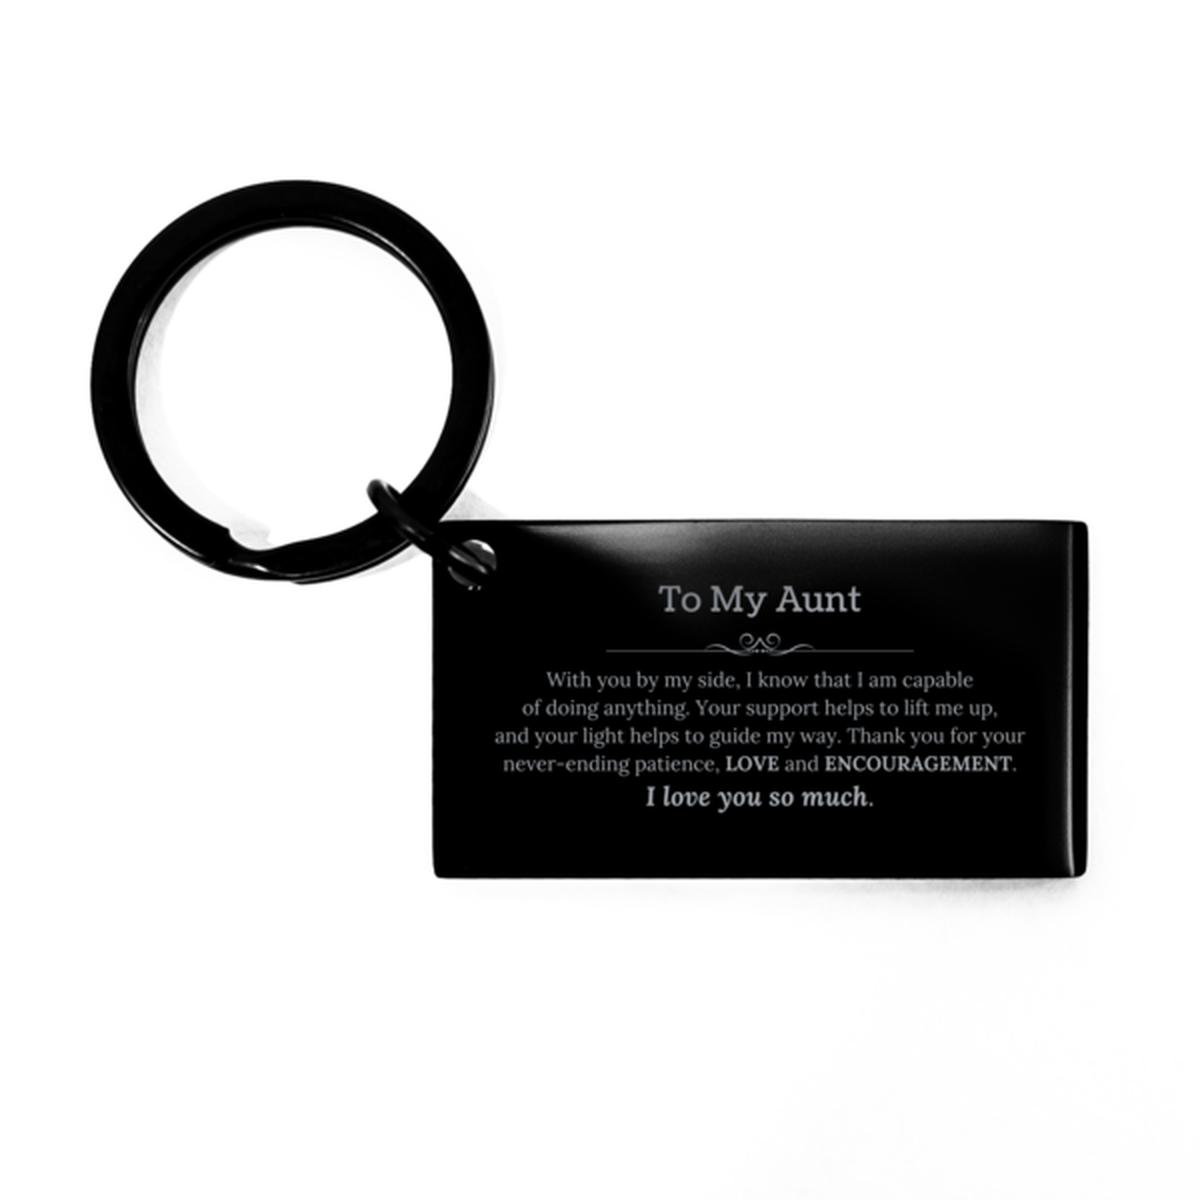 Appreciation Aunt Keychain Gifts, To My Aunt Birthday Christmas Wedding Keepsake Gifts for Aunt With you by my side, I know that I am capable of doing anything. I love you so much